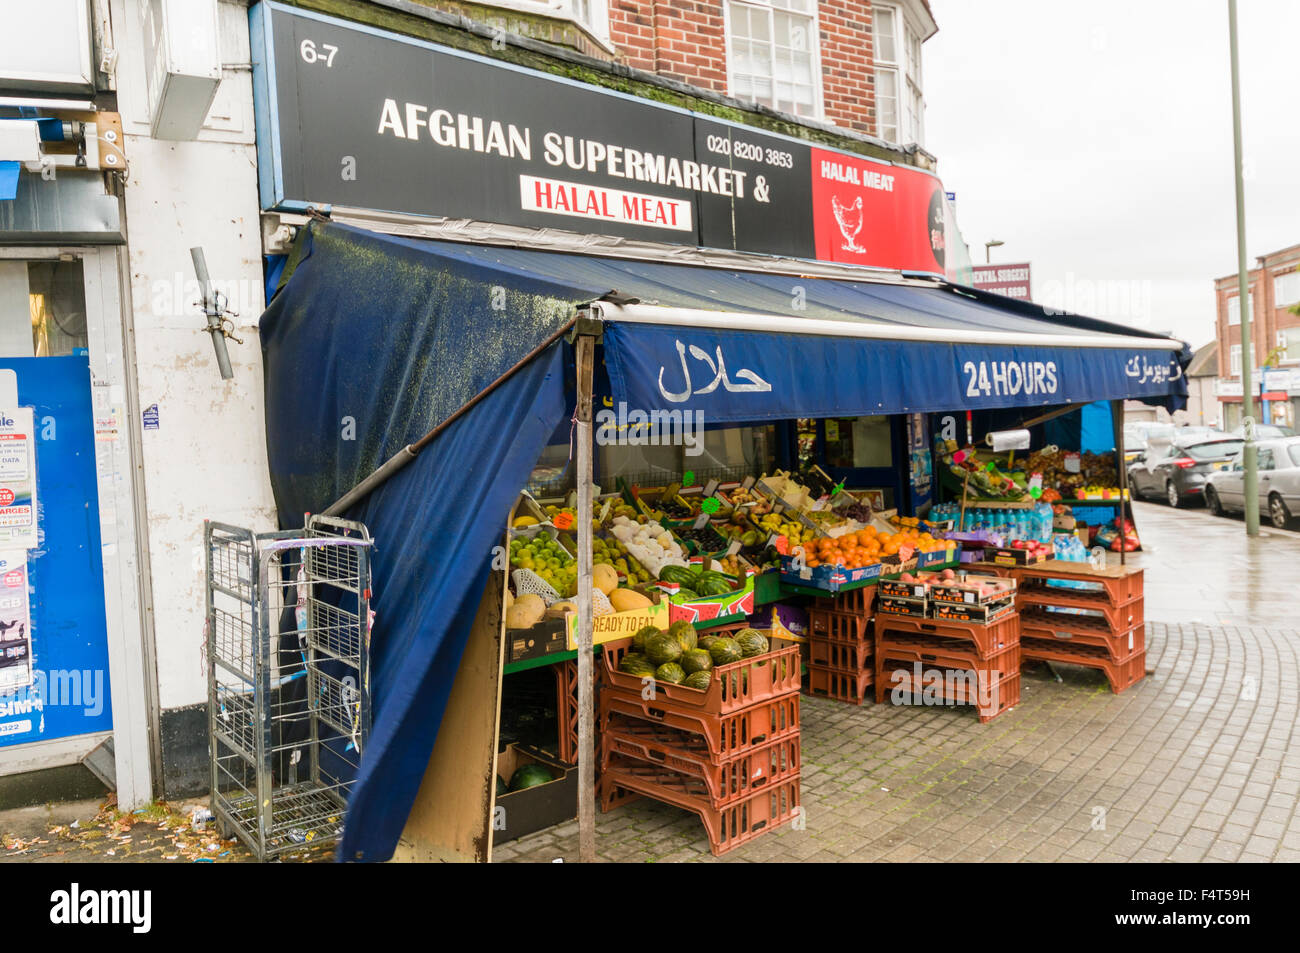 Afghan supermarket in West London, open 24 hours, selling Halal meat Stock Photo